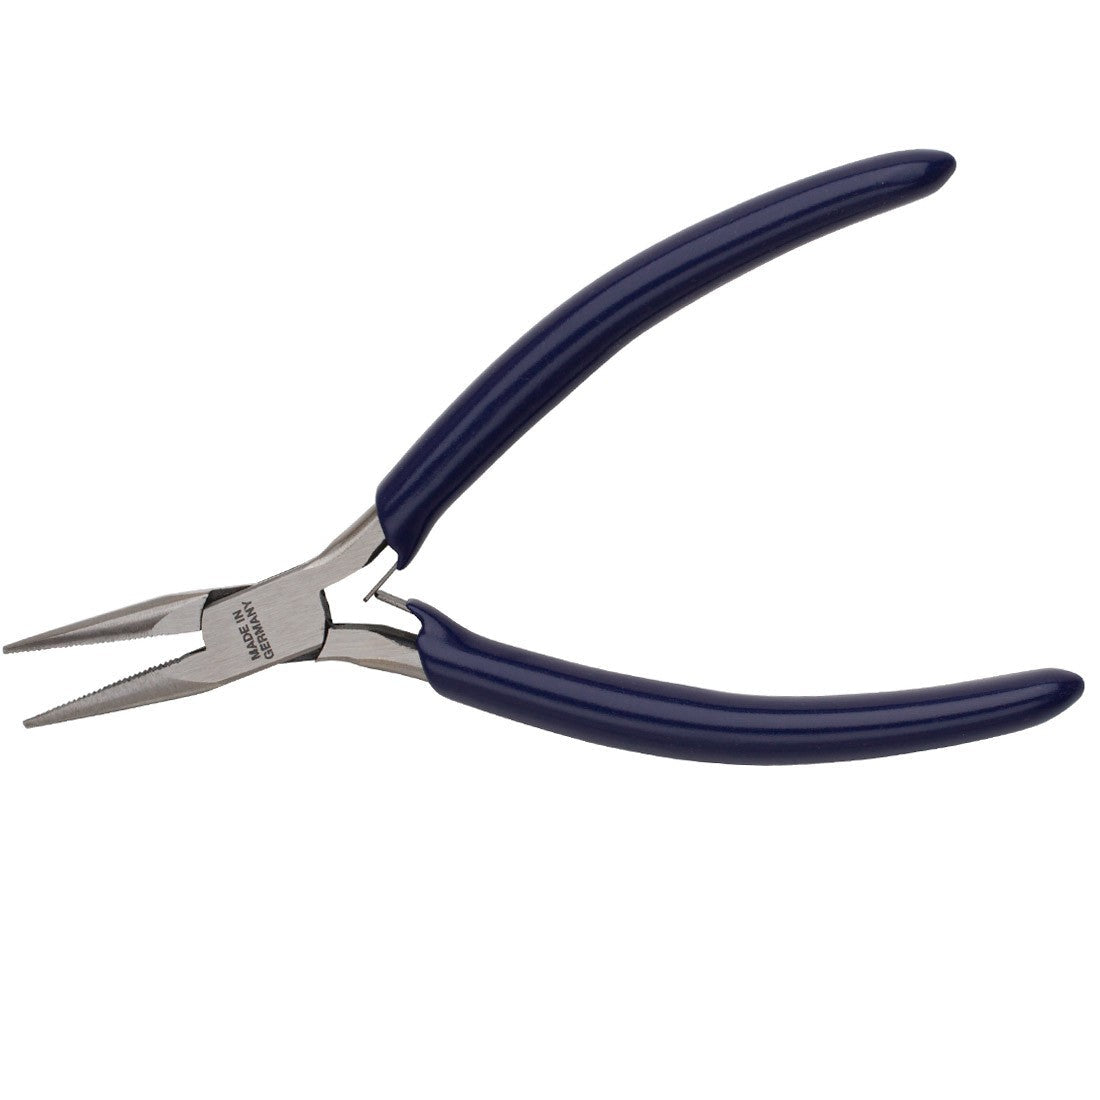 PL-102, Precision 4 1/2" Extra-Duty German Box-Joint Pliers, Chain Nose, Serrated (115mm)